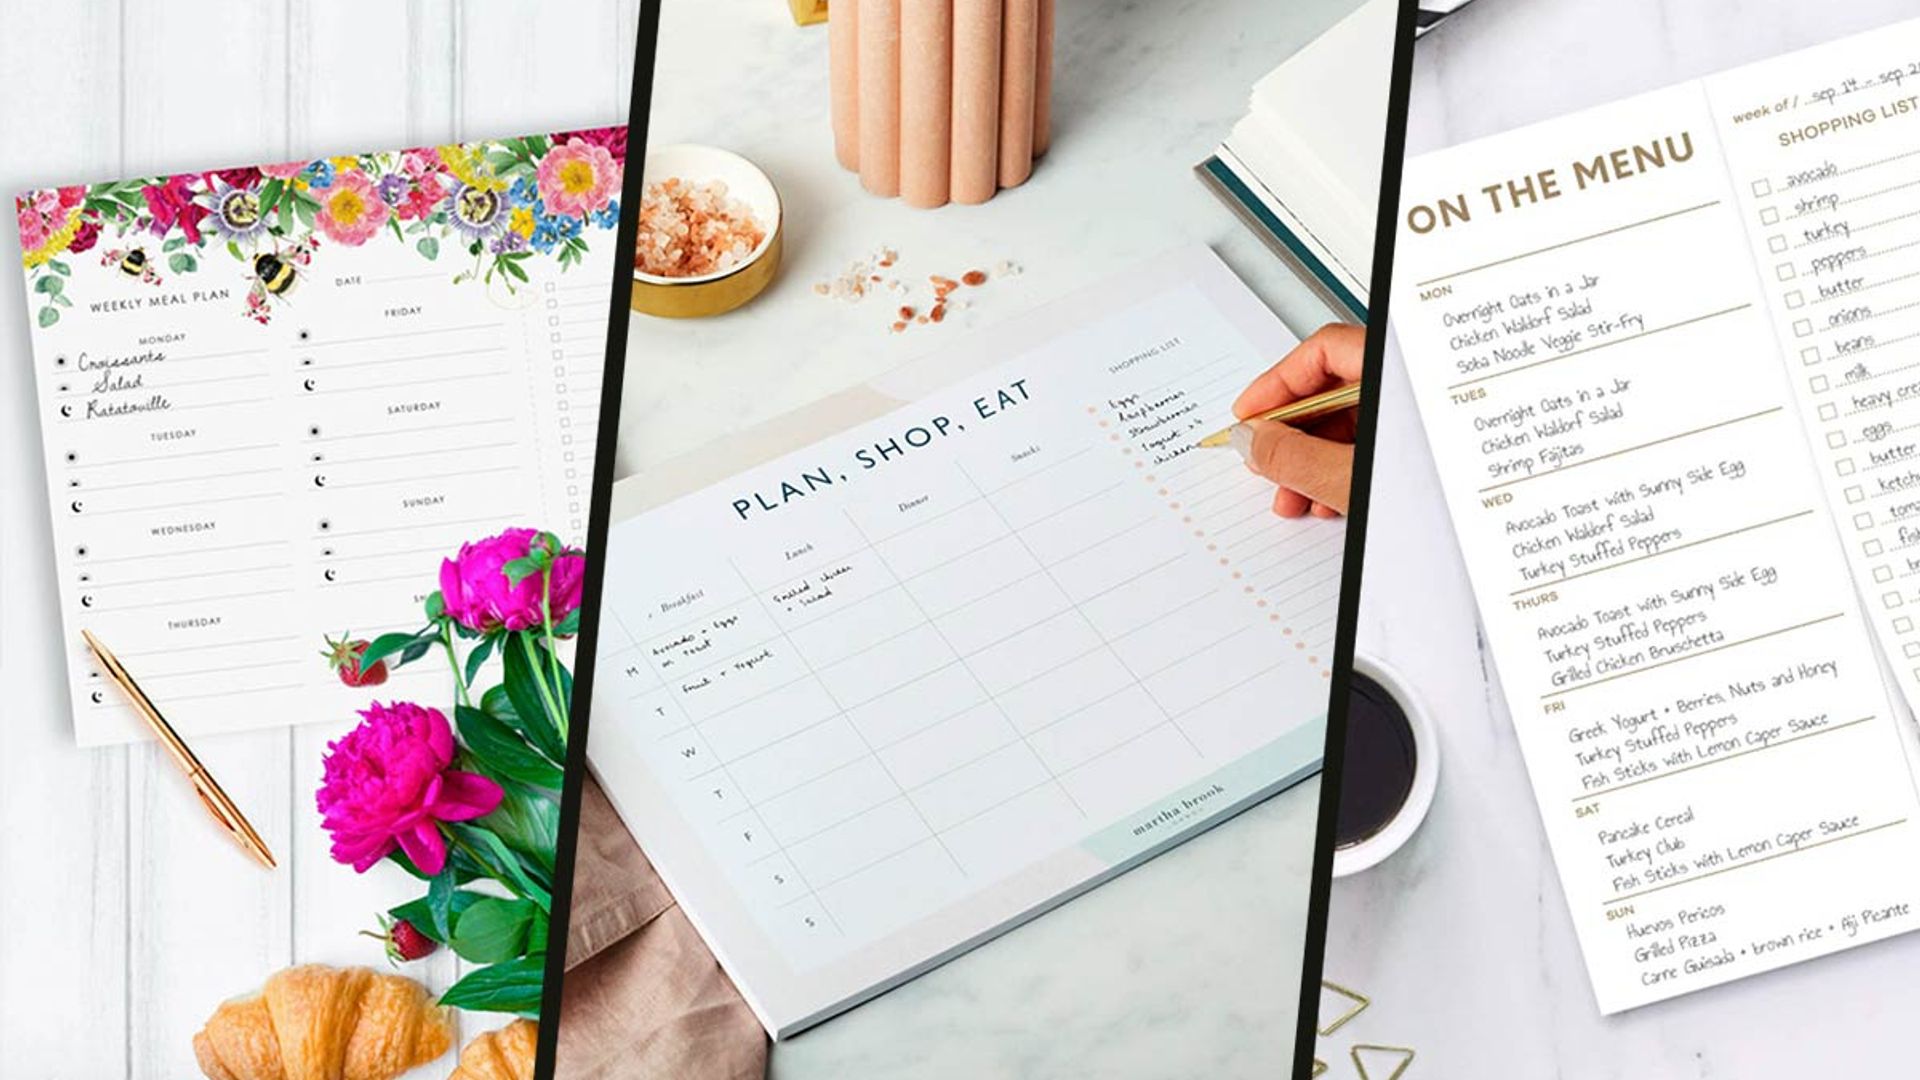 Best meal planners and food diaries for a healthy lifestyle in 2022